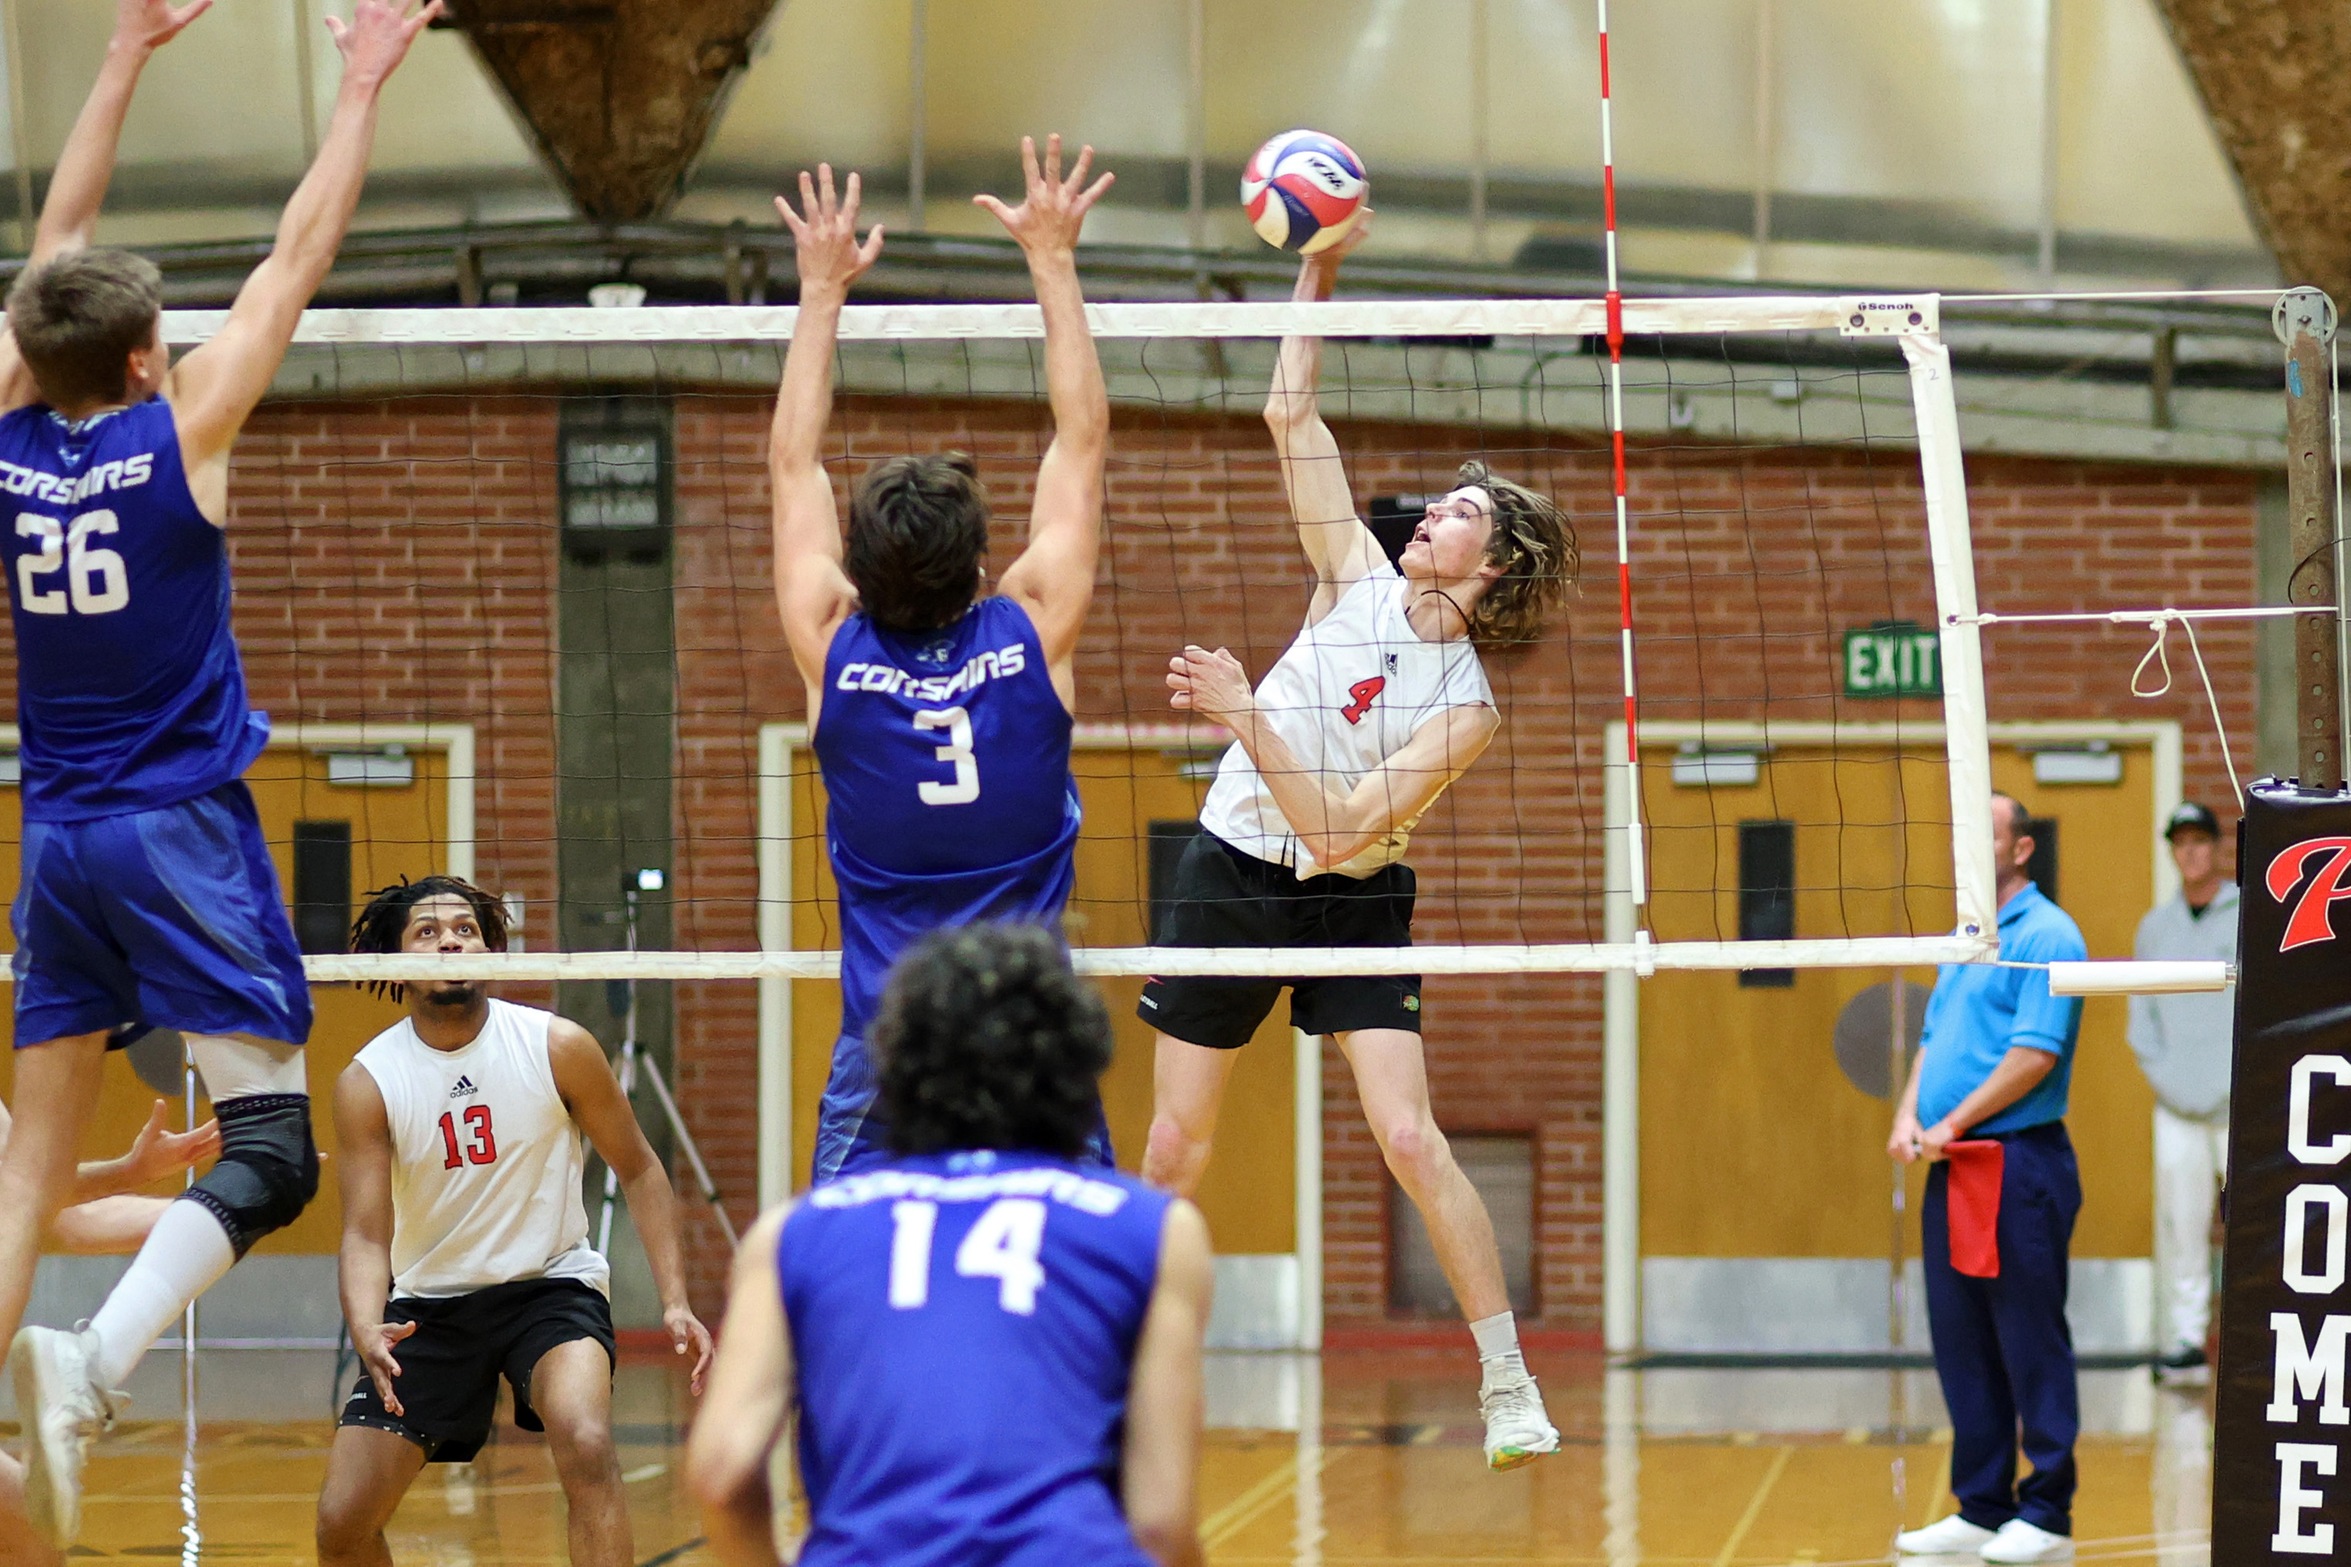 Aiden Scripps finished with 12 digs against Santiago Canyon College. Photo by Hugh Cox.